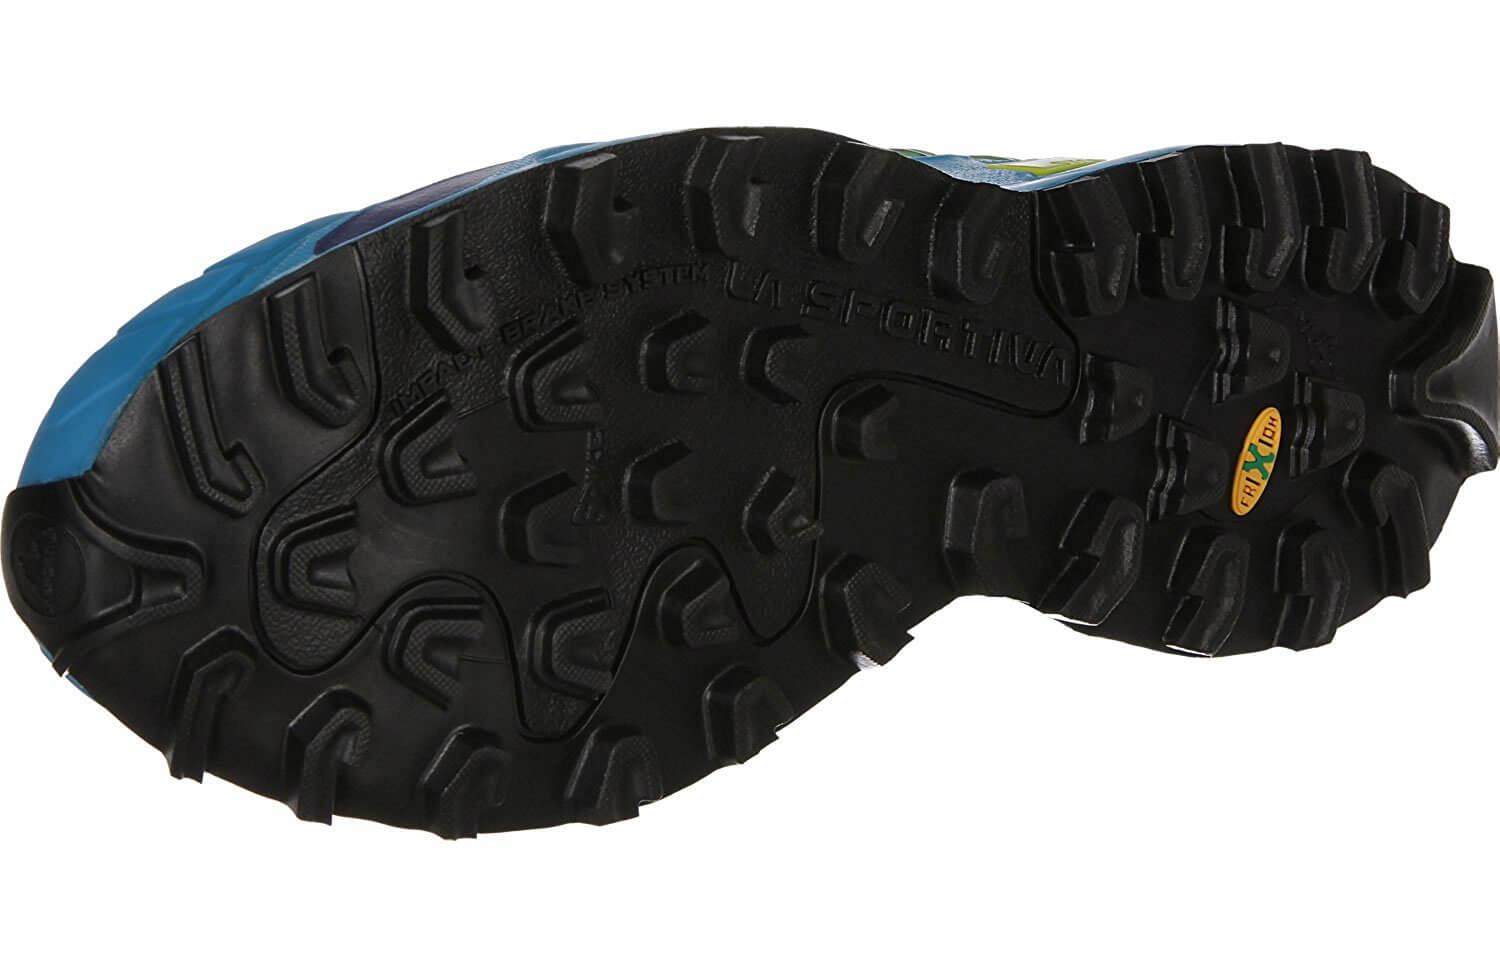 the outsole of the La Sportiva Mutant features tenacious treads and allows runners to screw in separate spikes for more traction